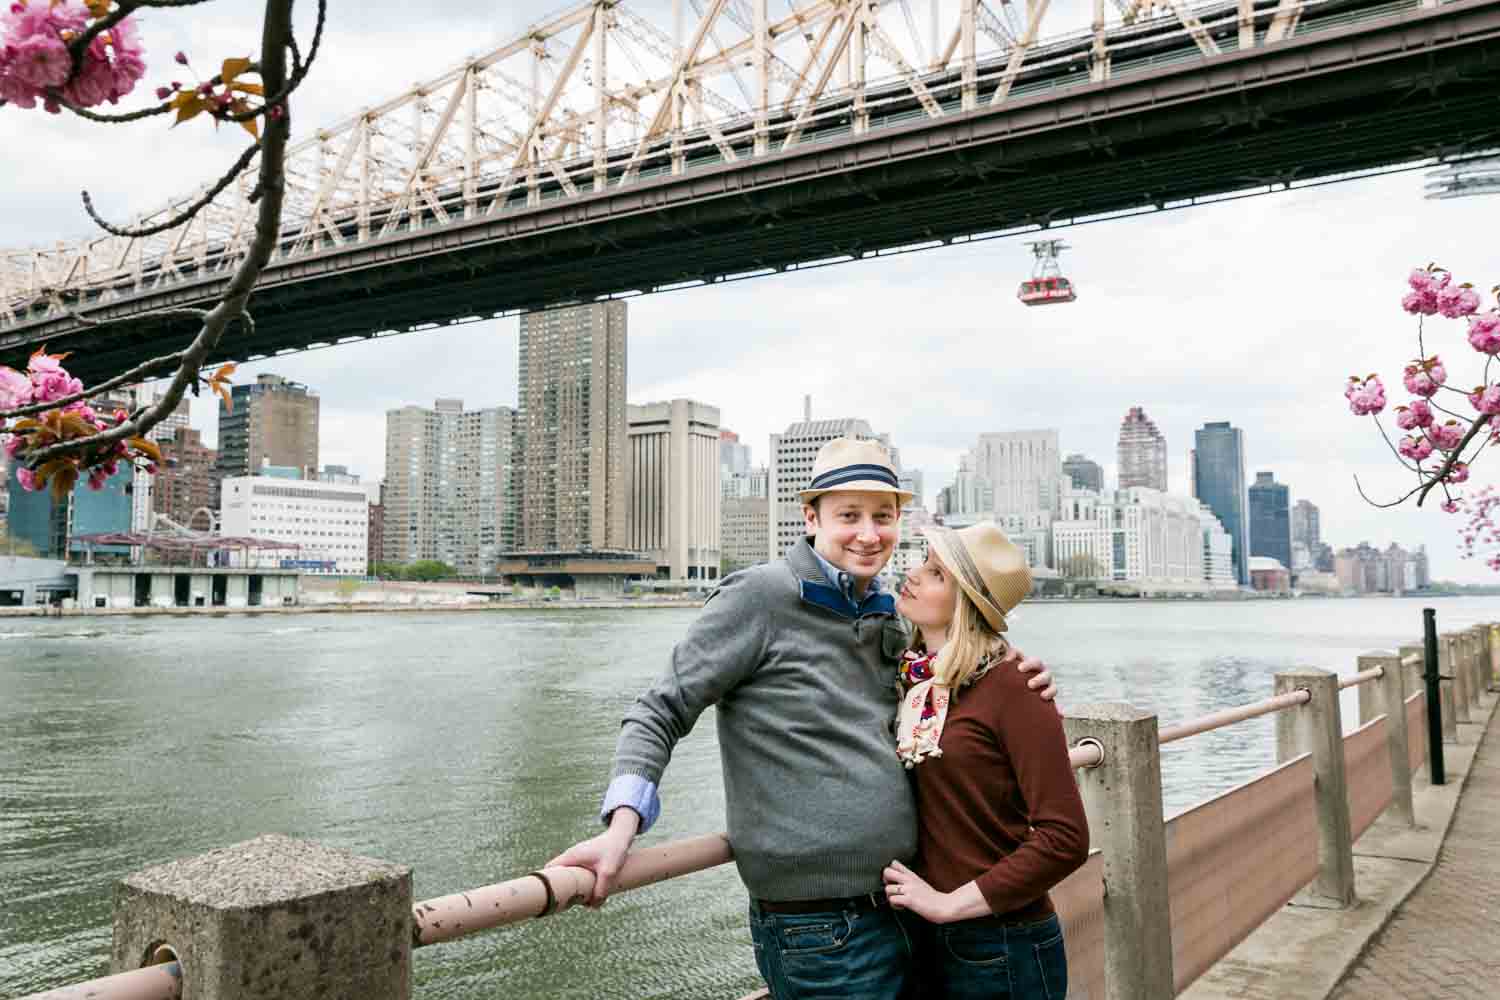 Couple against railing with Roosevelt Island tram in background